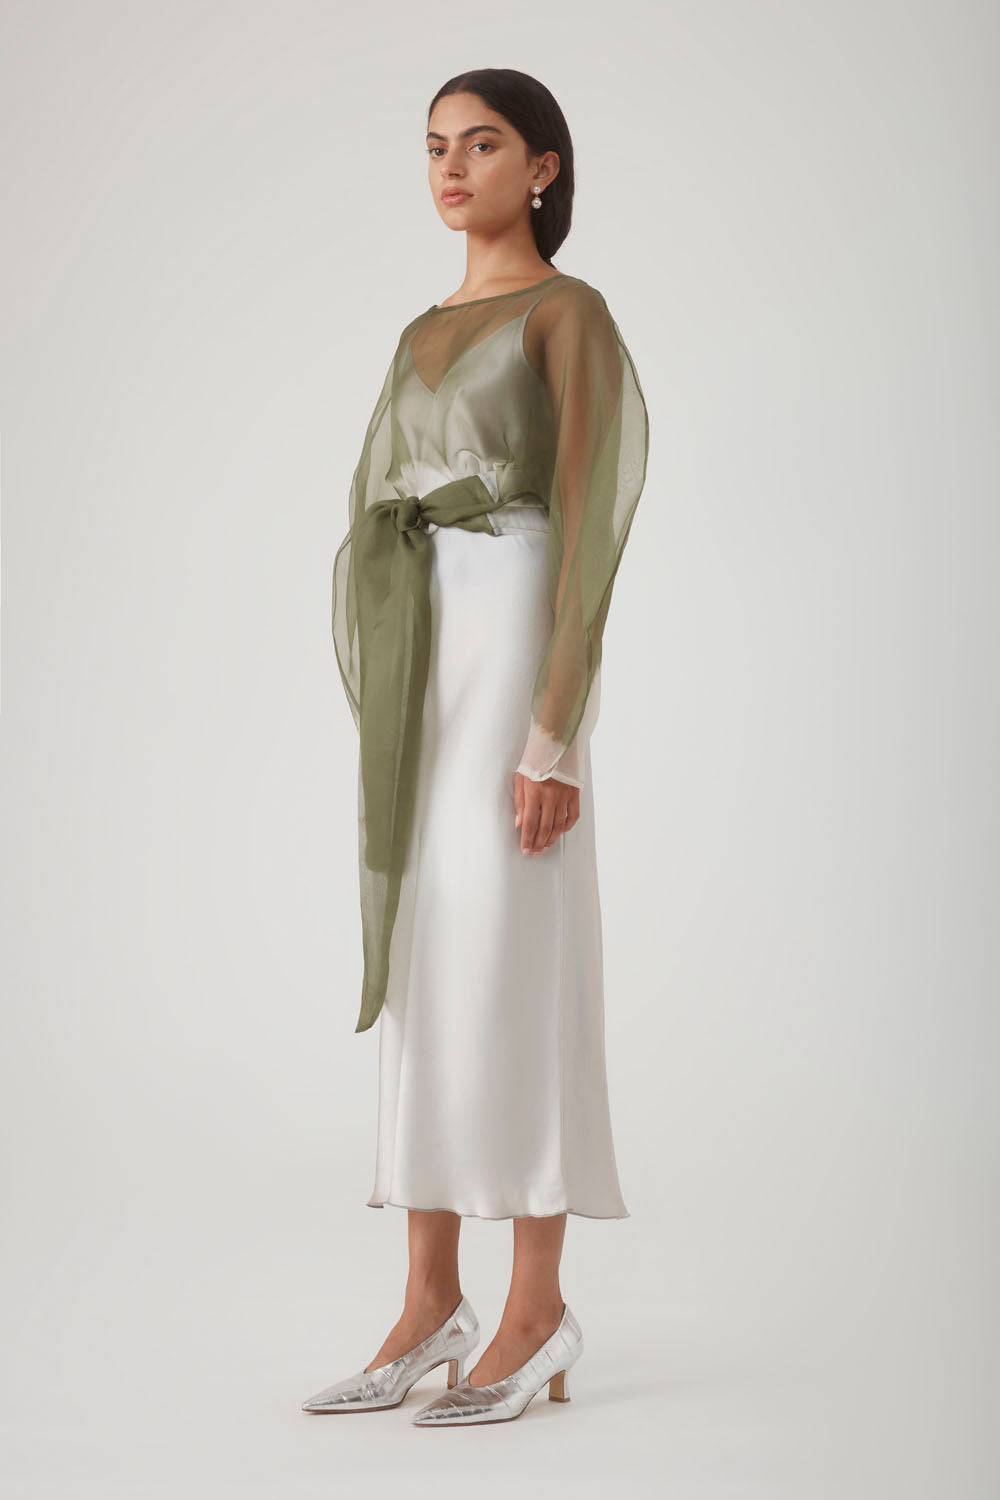 ROOHI ORGANZA WRAP TOP - OLIVE OMBRE